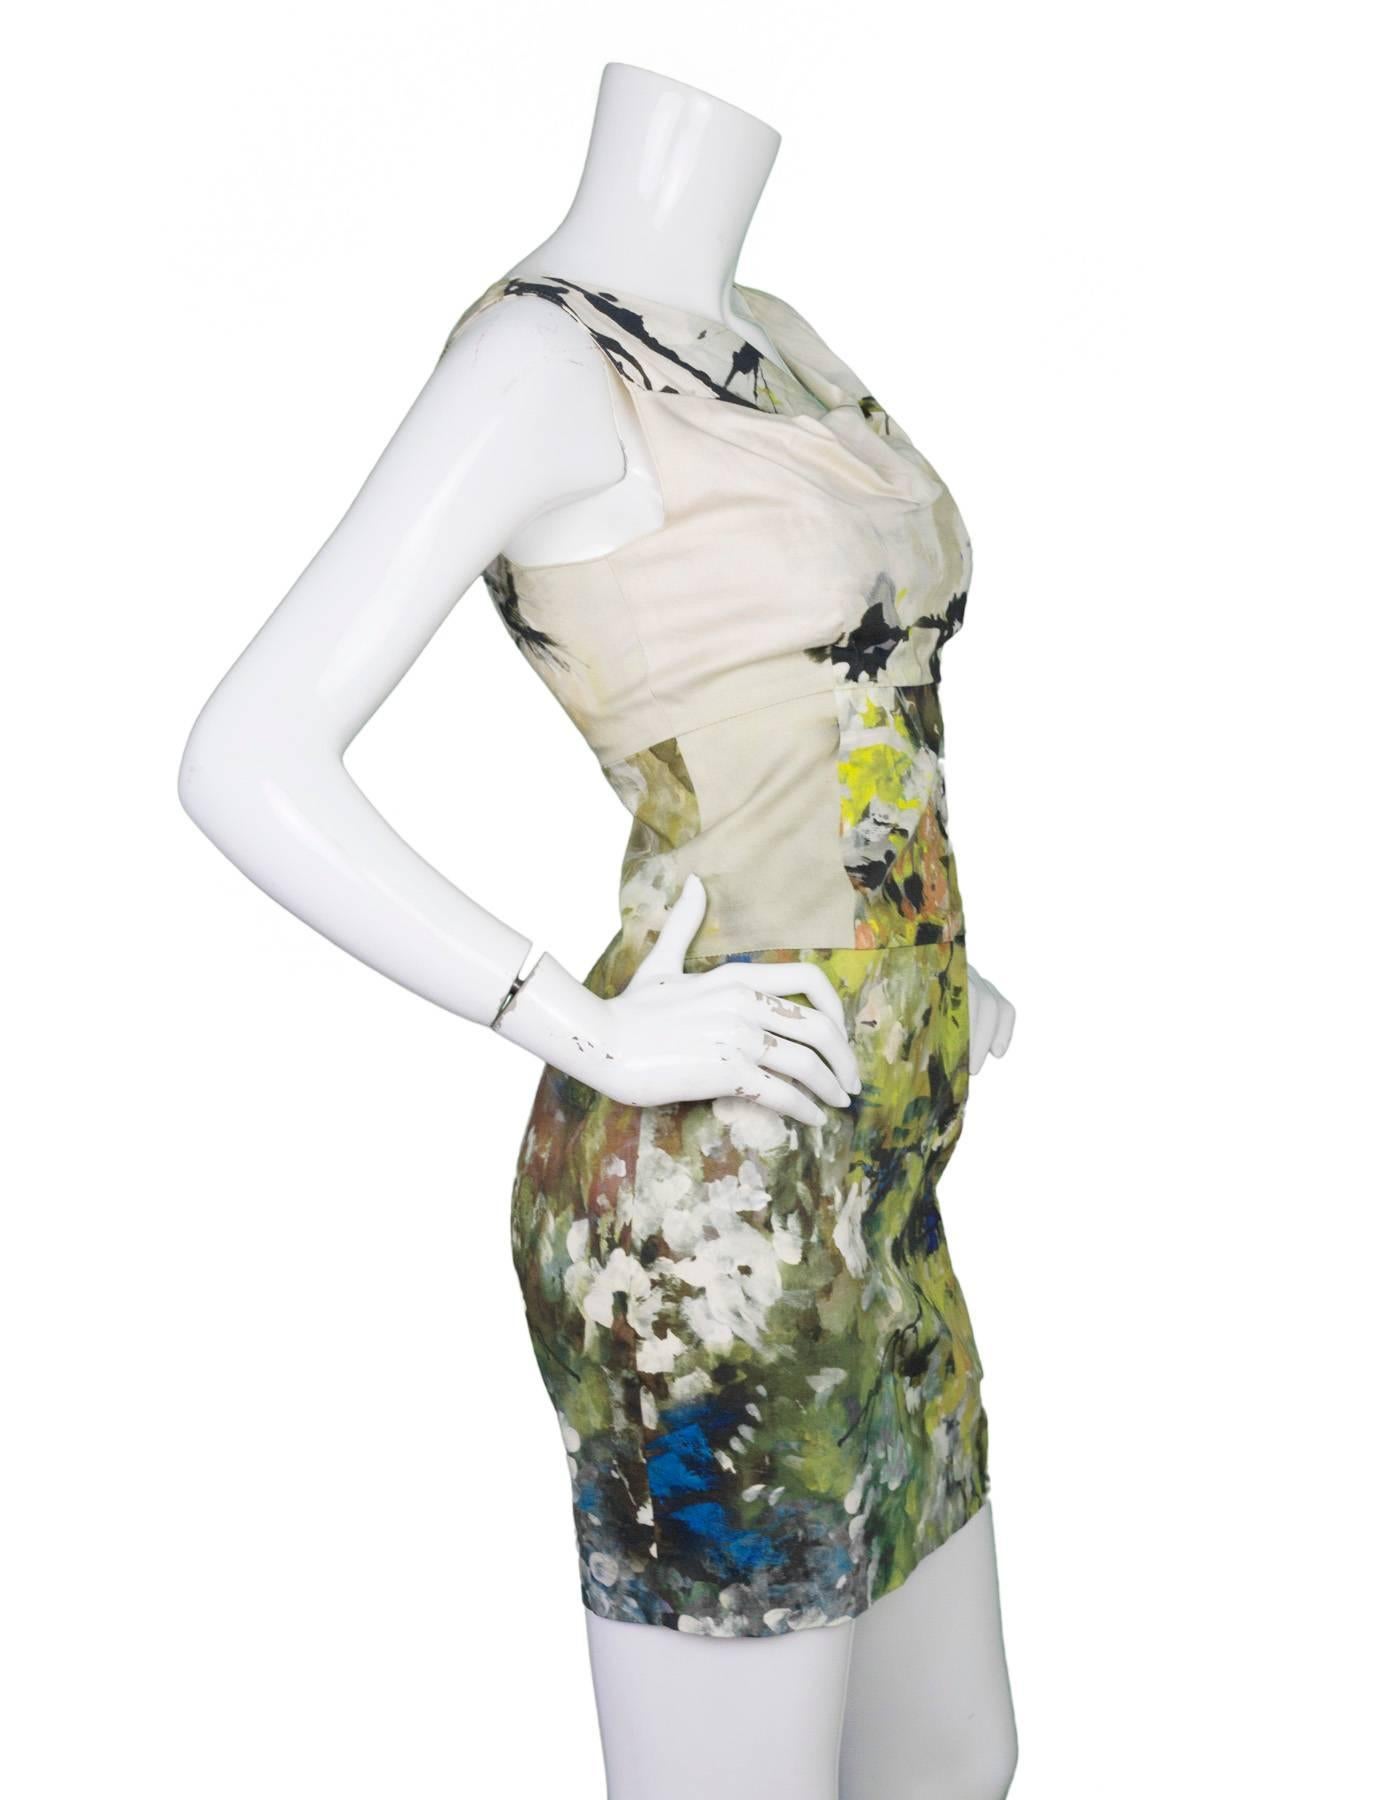 Black Halo Beige Floral Print Dress 
Features asymmetric ruched neckline

Made In: USA
Color: Beige and multi-colored
Composition: 97% cotton, 3% spandex
Lining: Beige, 95% polyester, 5% spandex
Closure/Opening: Zip up back
Exterior Pockets: